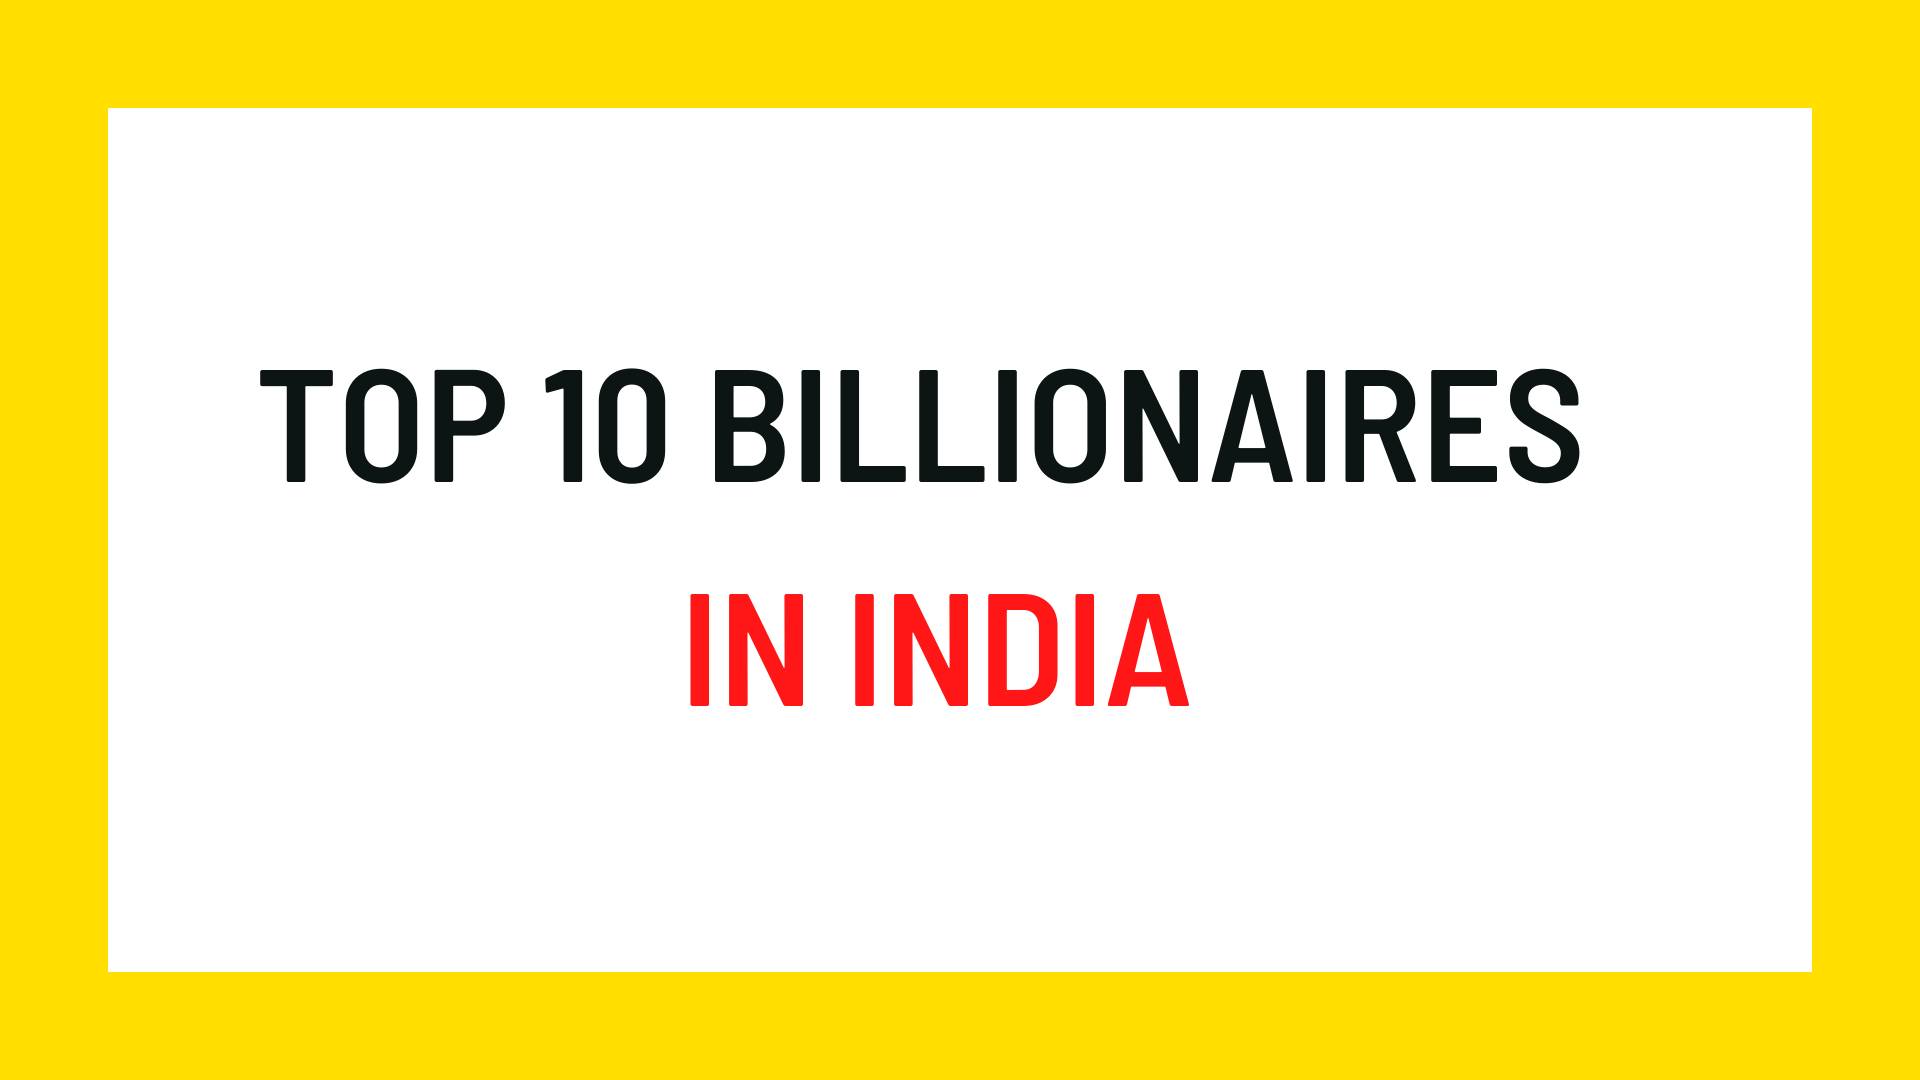 Top 10 Billionaires in India 2021 | List of top 10 Indian Billionaires in 2021 with their net worth